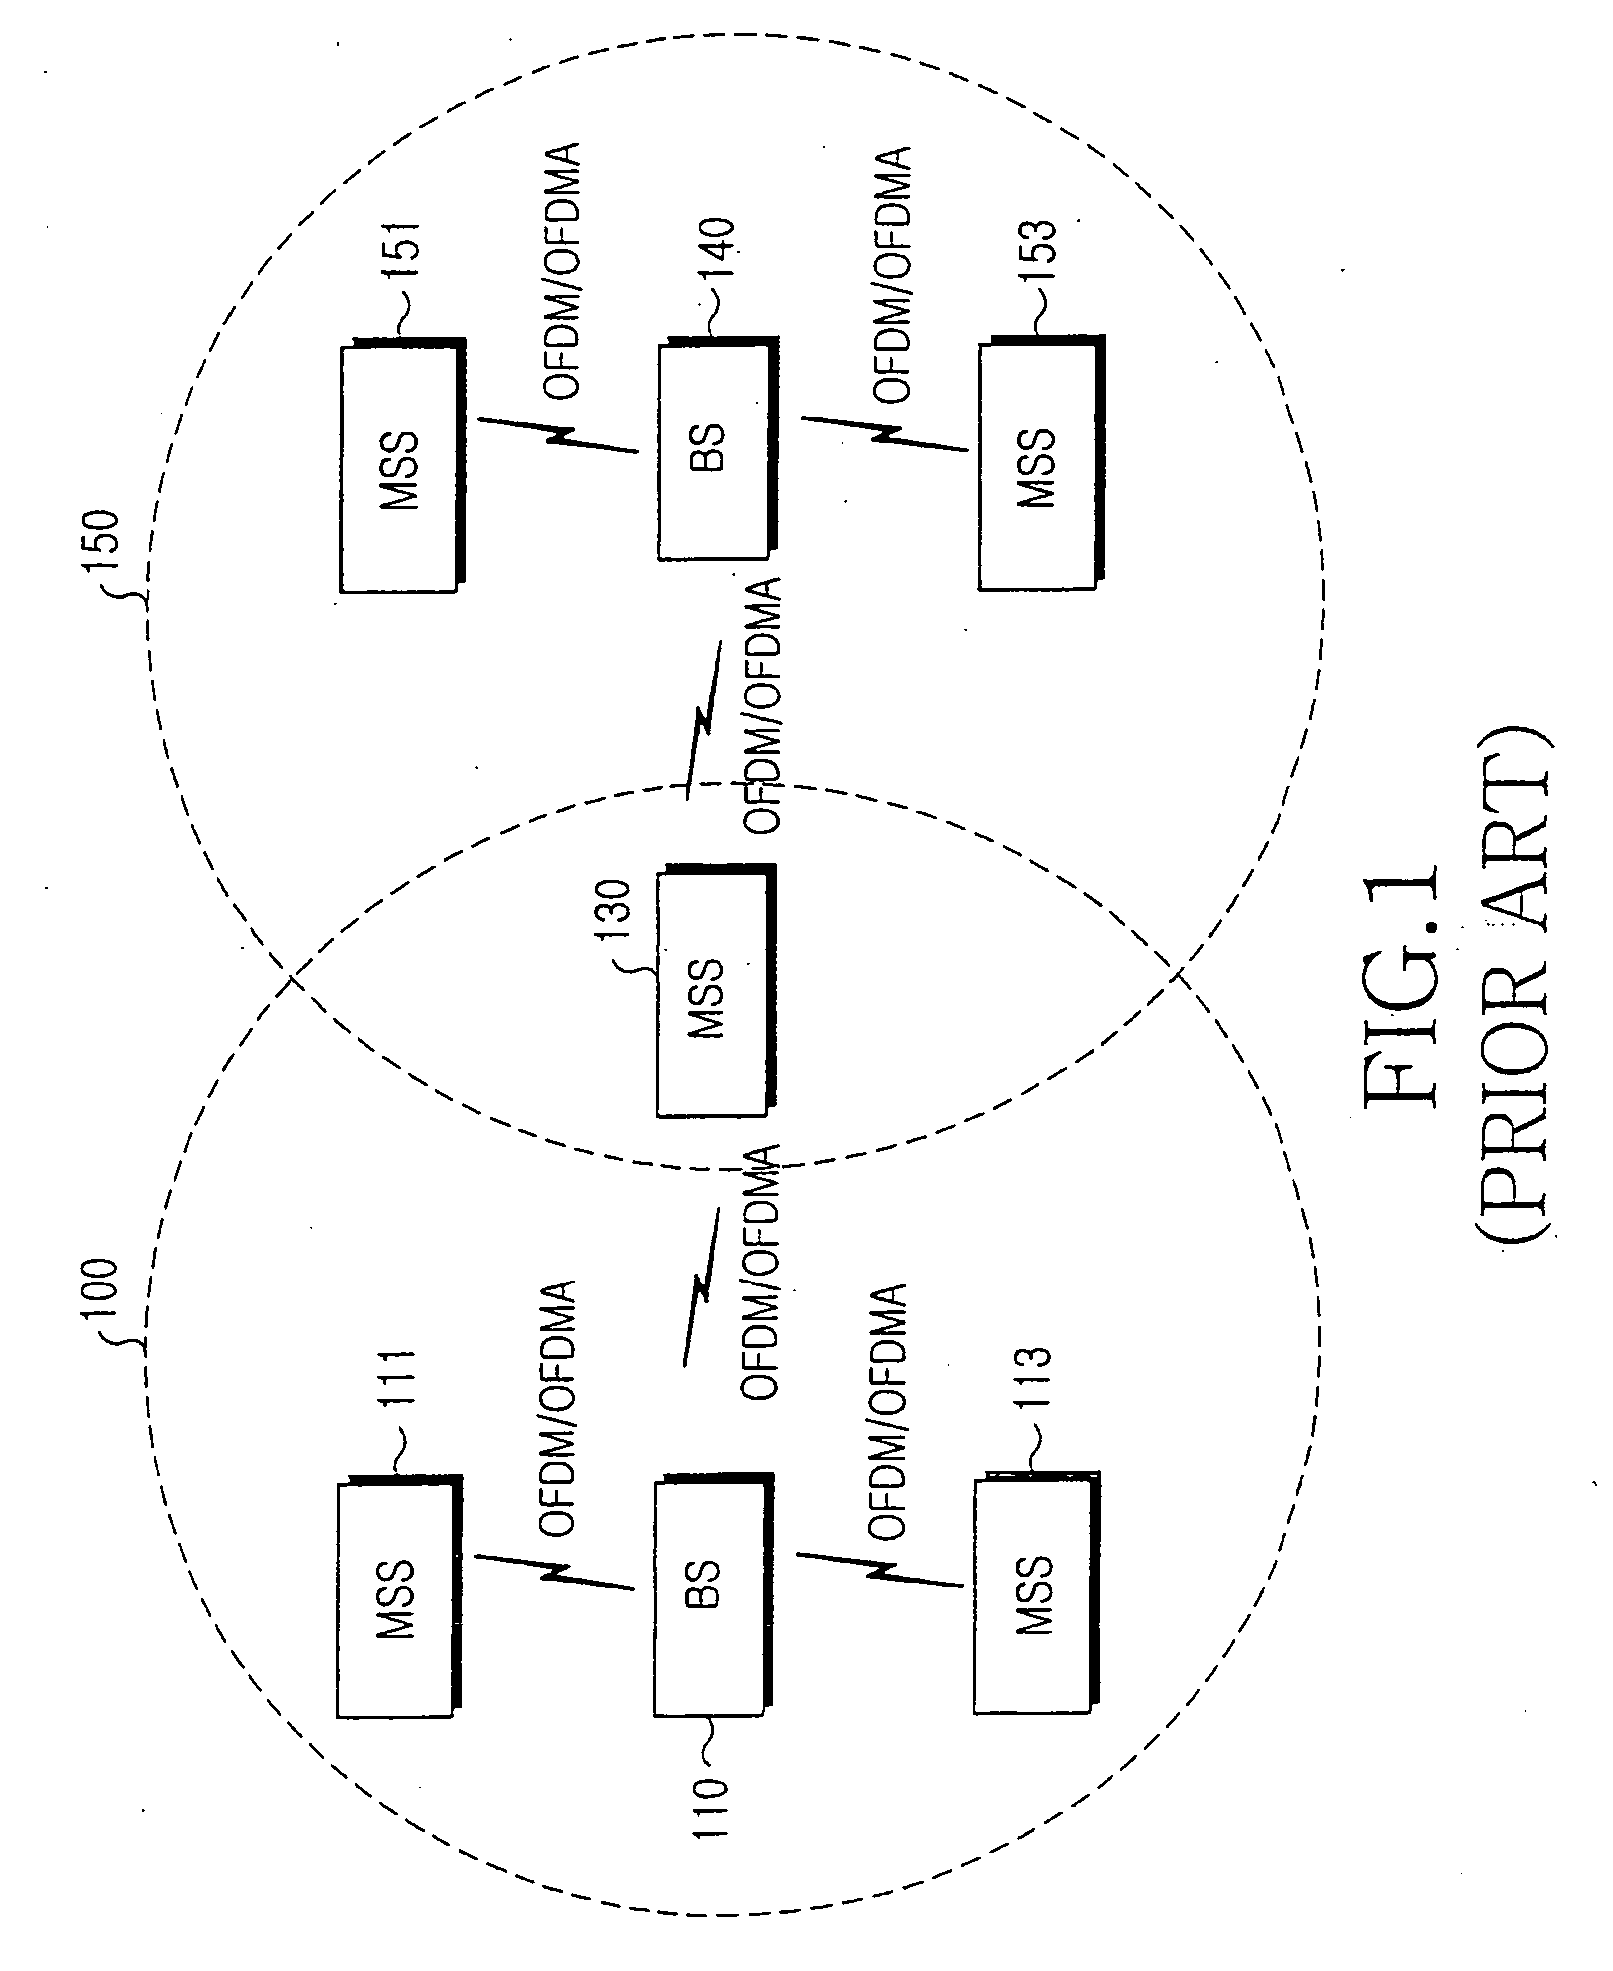 Connection identification allocating system and method in a broadband wireless access communication system